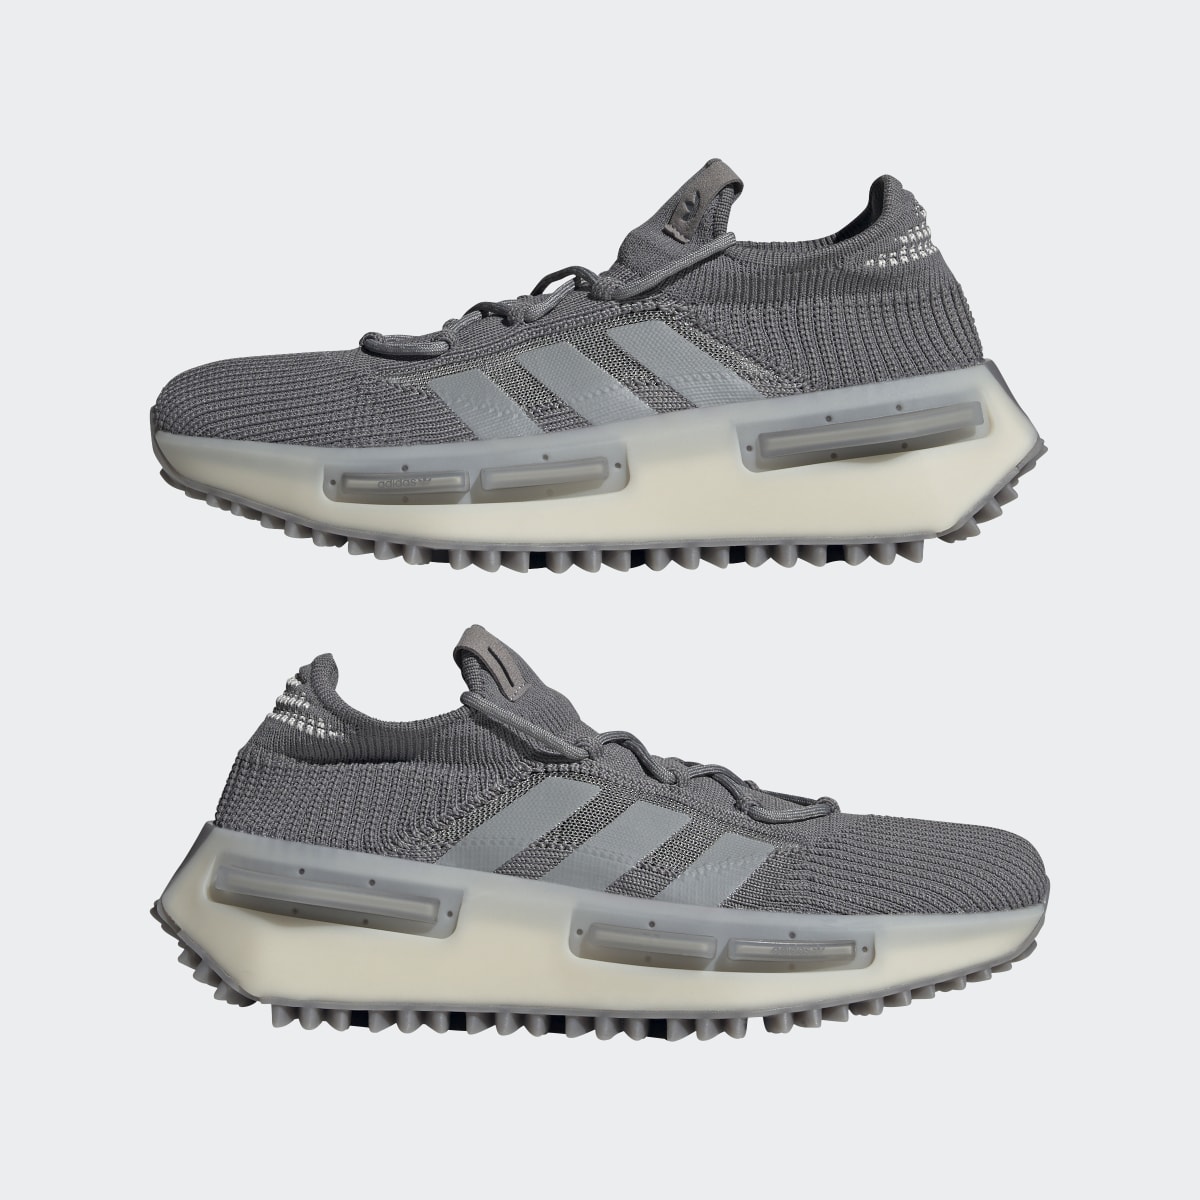 Adidas NMD_S1 Shoes. 8